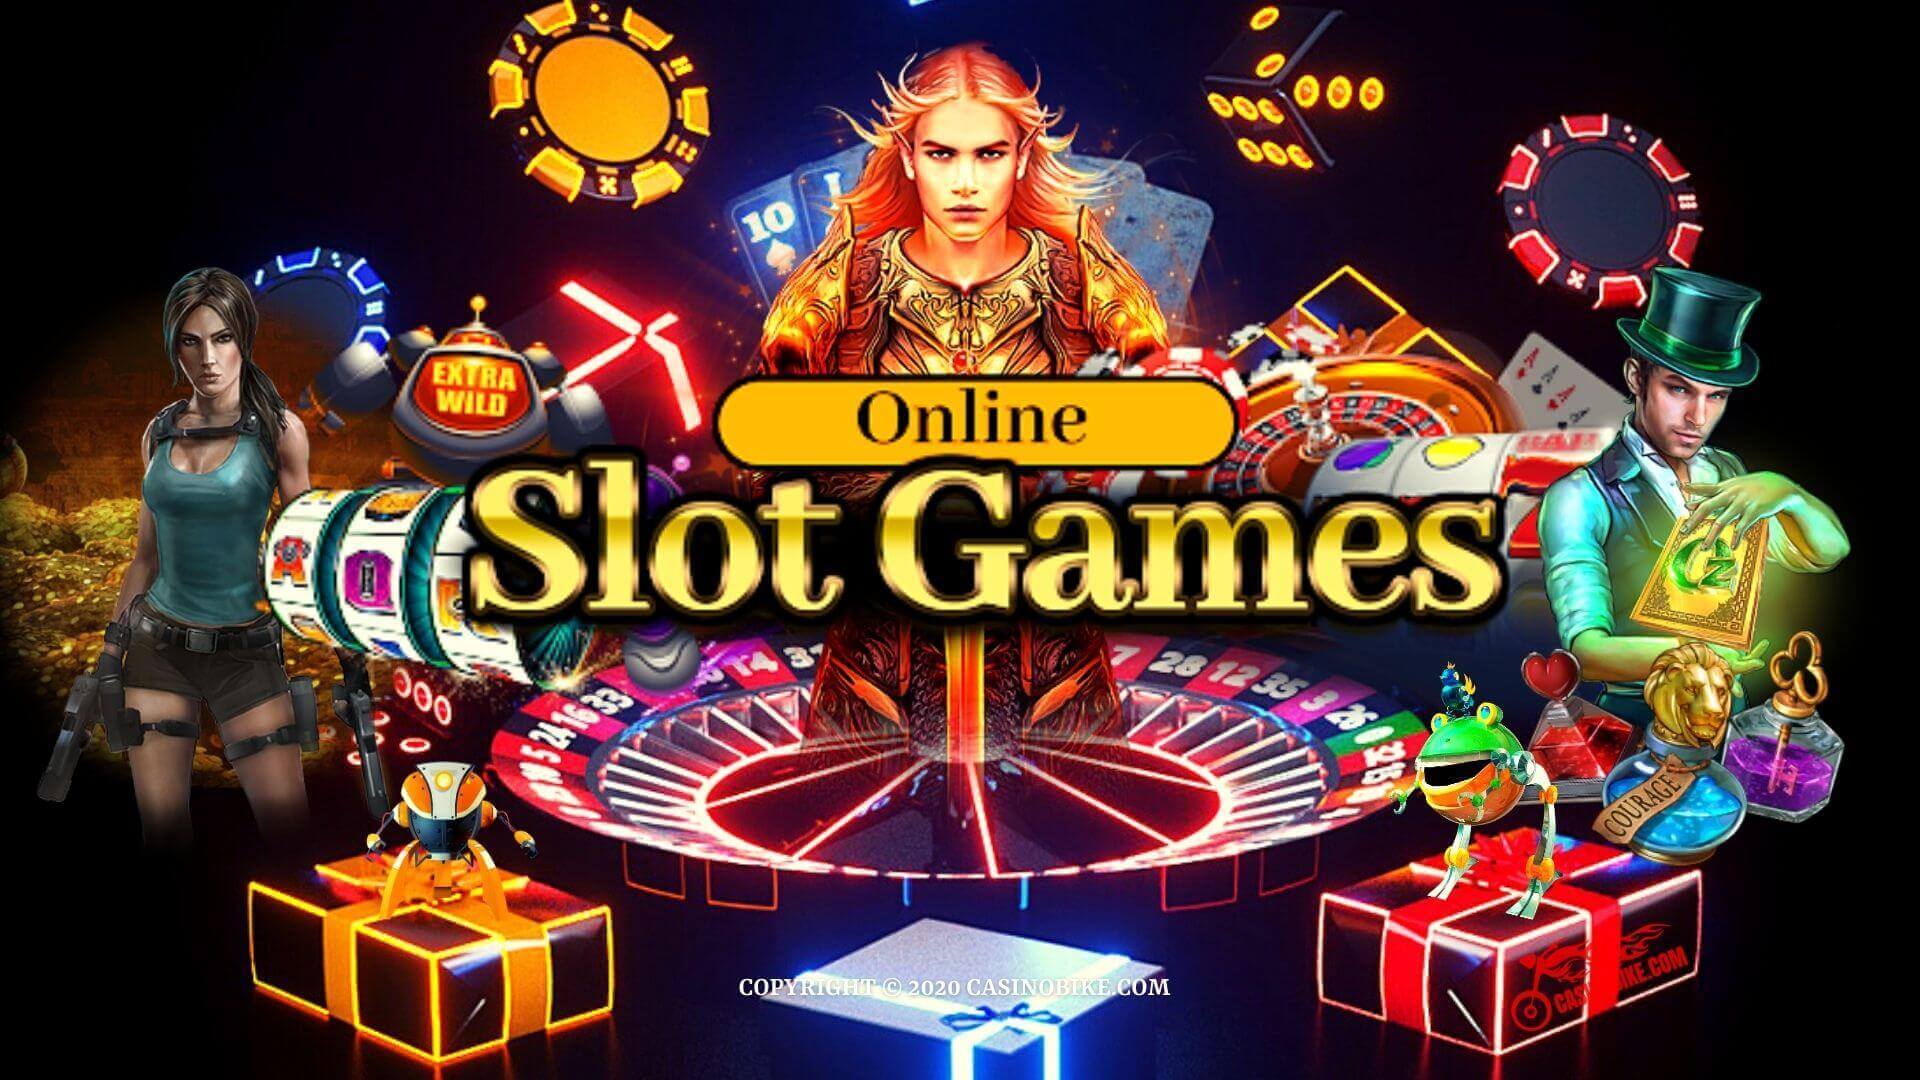 At Last, The Secret To top online casino sites Is Revealed